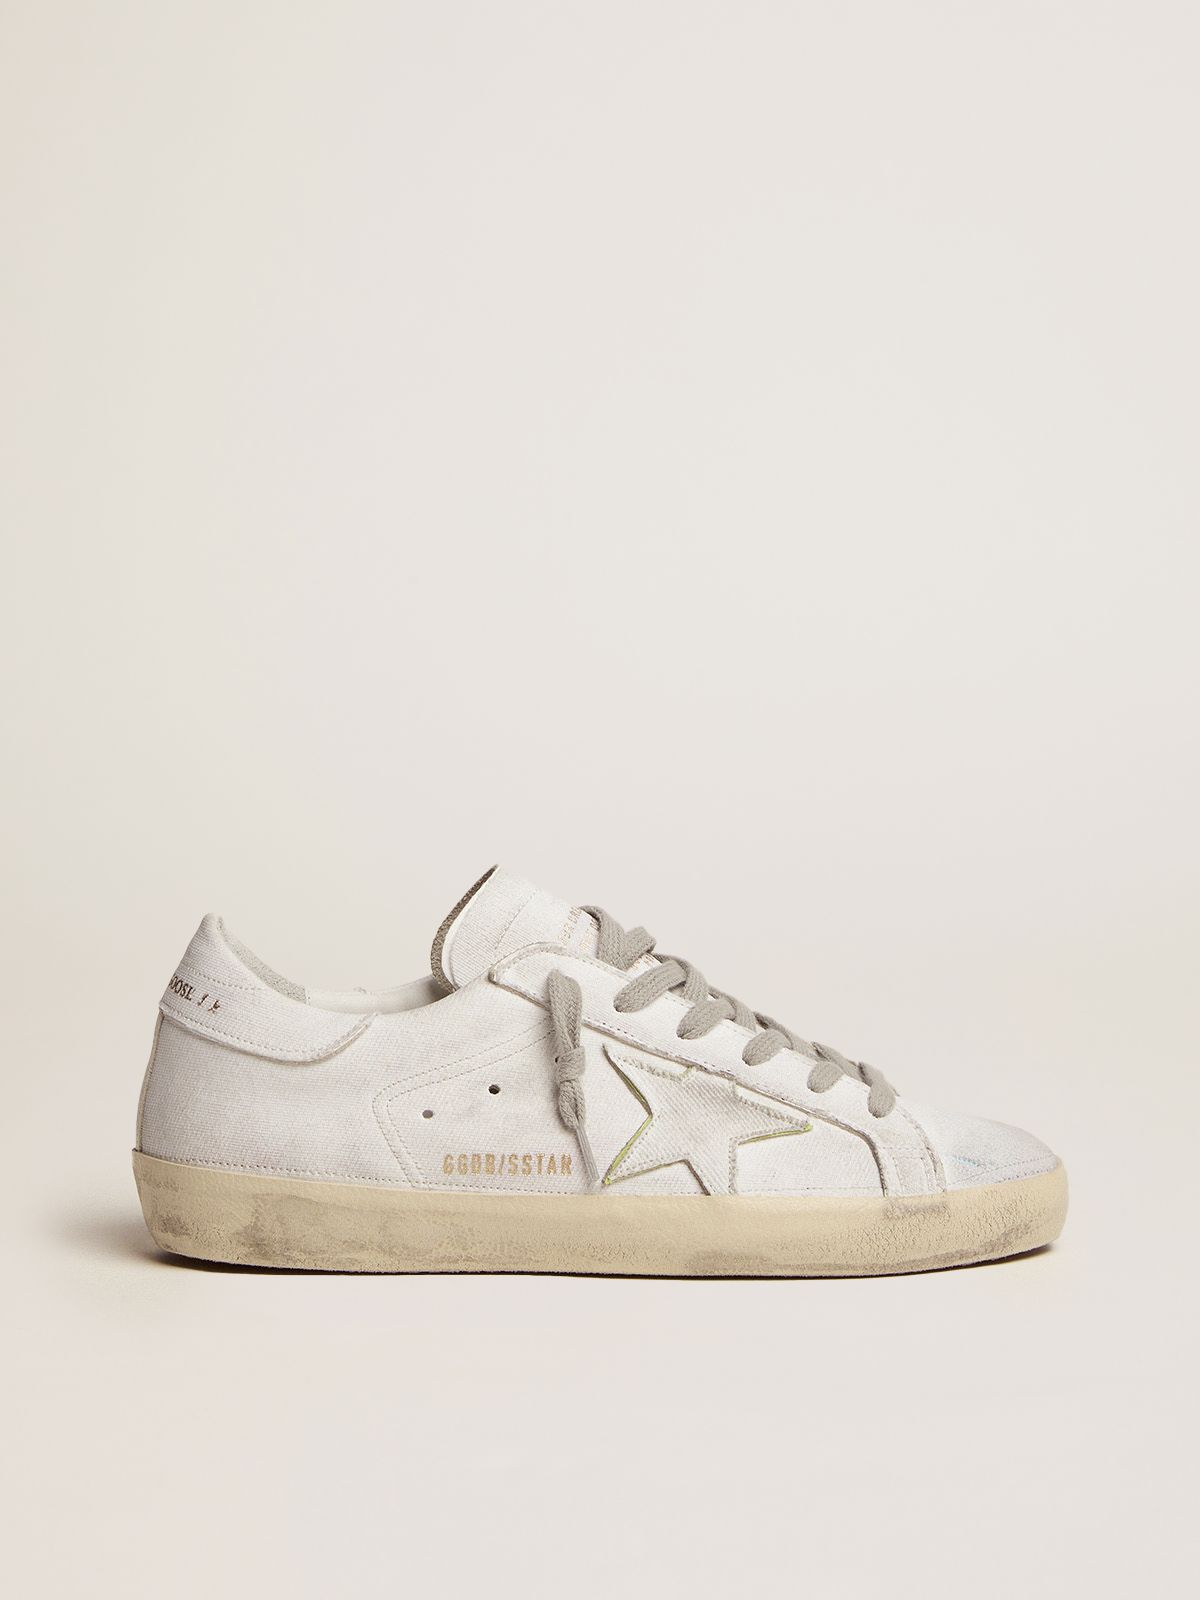 golden goose sneakers with reverse Super-Star details construction multicolor in hidden color Dream Maker white and